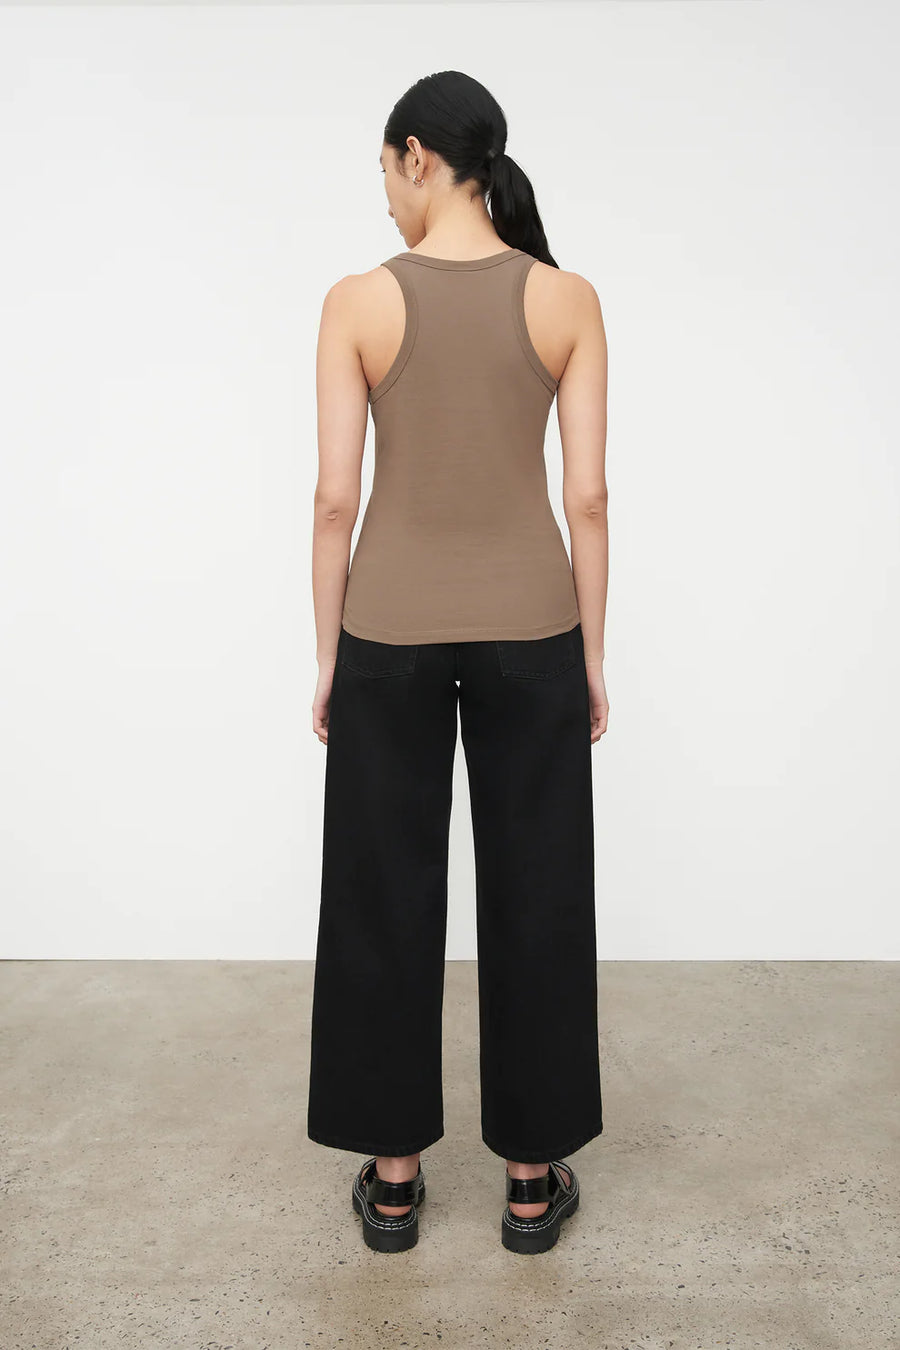 Kowtow | Racer Back Singlet - Taupe